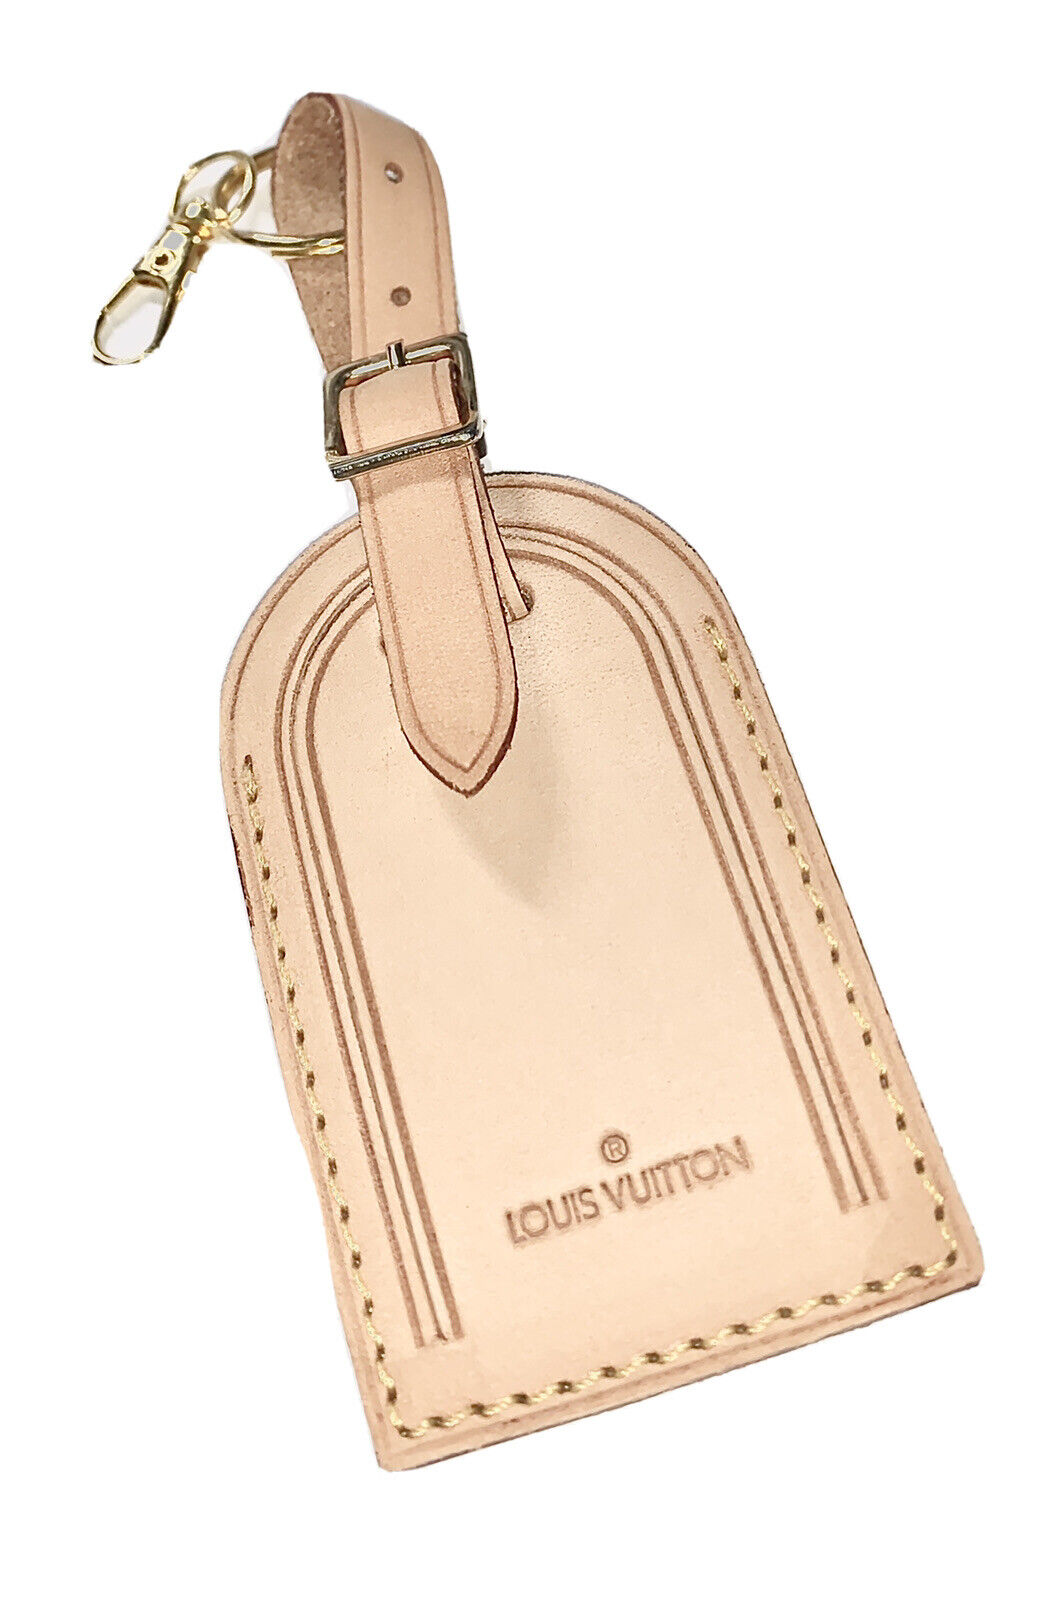 Louis Vuitton Luggage Tag made in France  Louis vuitton luggage tag, Louis  vuitton, Luggage tags